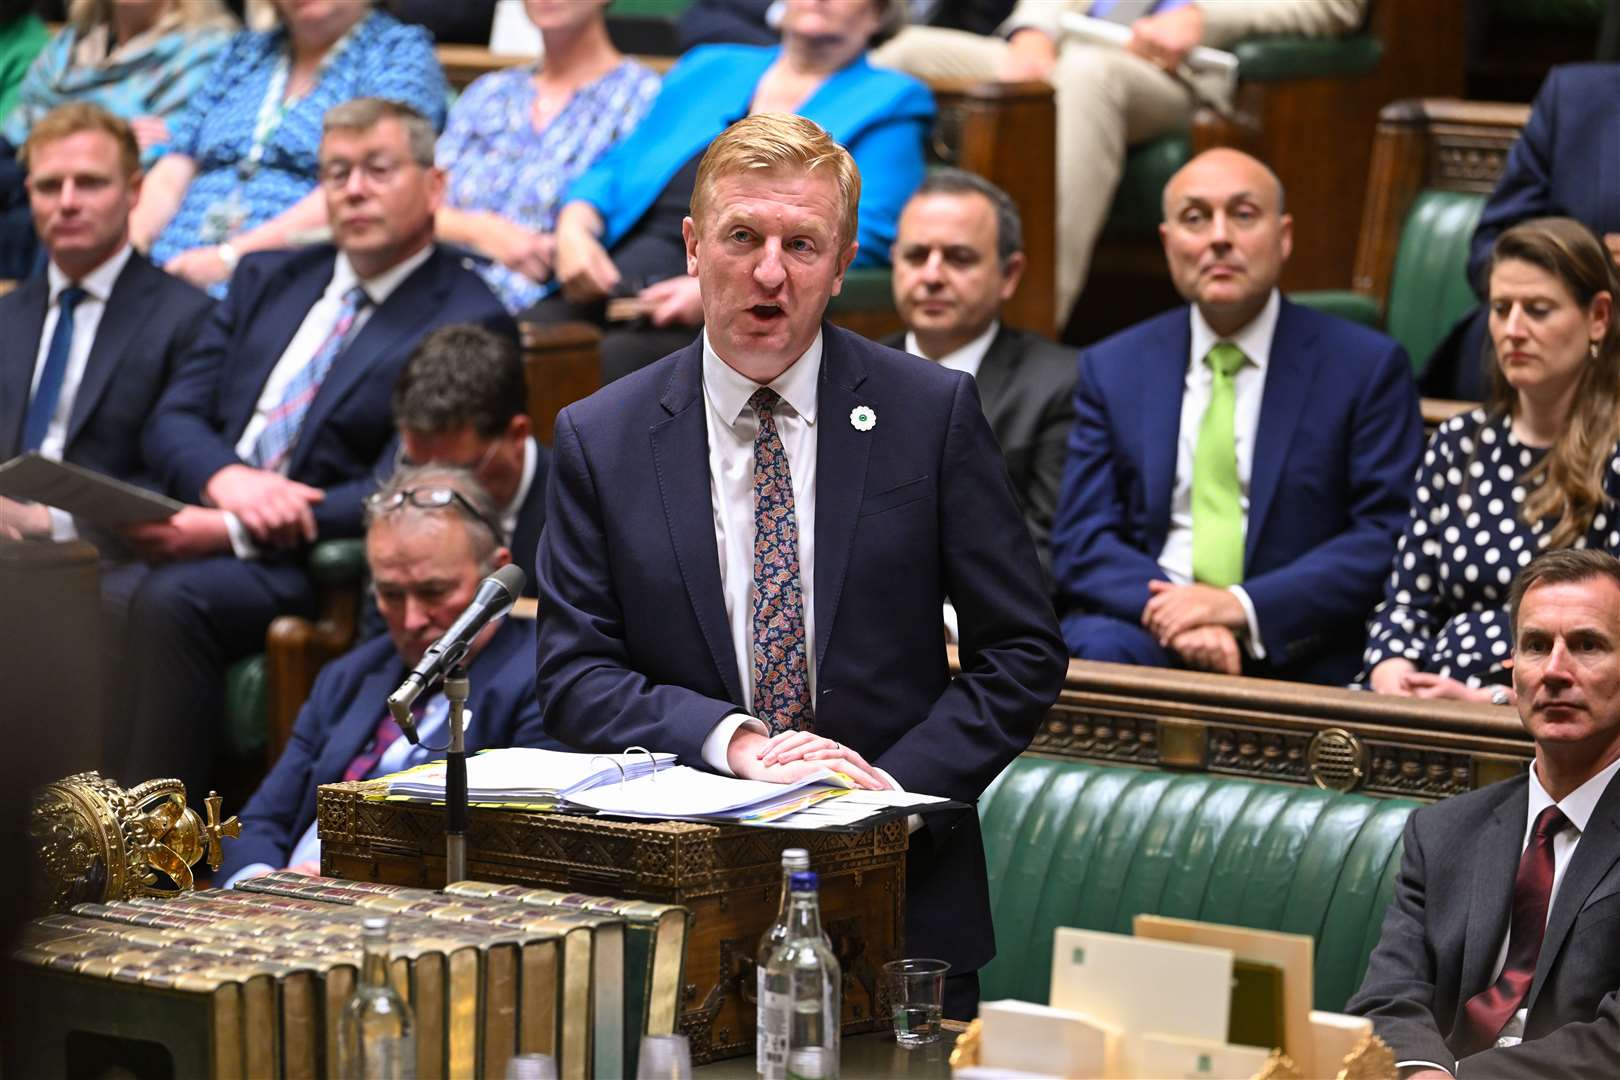 Deputy Prime Minister Oliver Dowden told MPs the Government would show discipline on spending and public sector pay (UK Parliament/Jessica Taylor/PA)